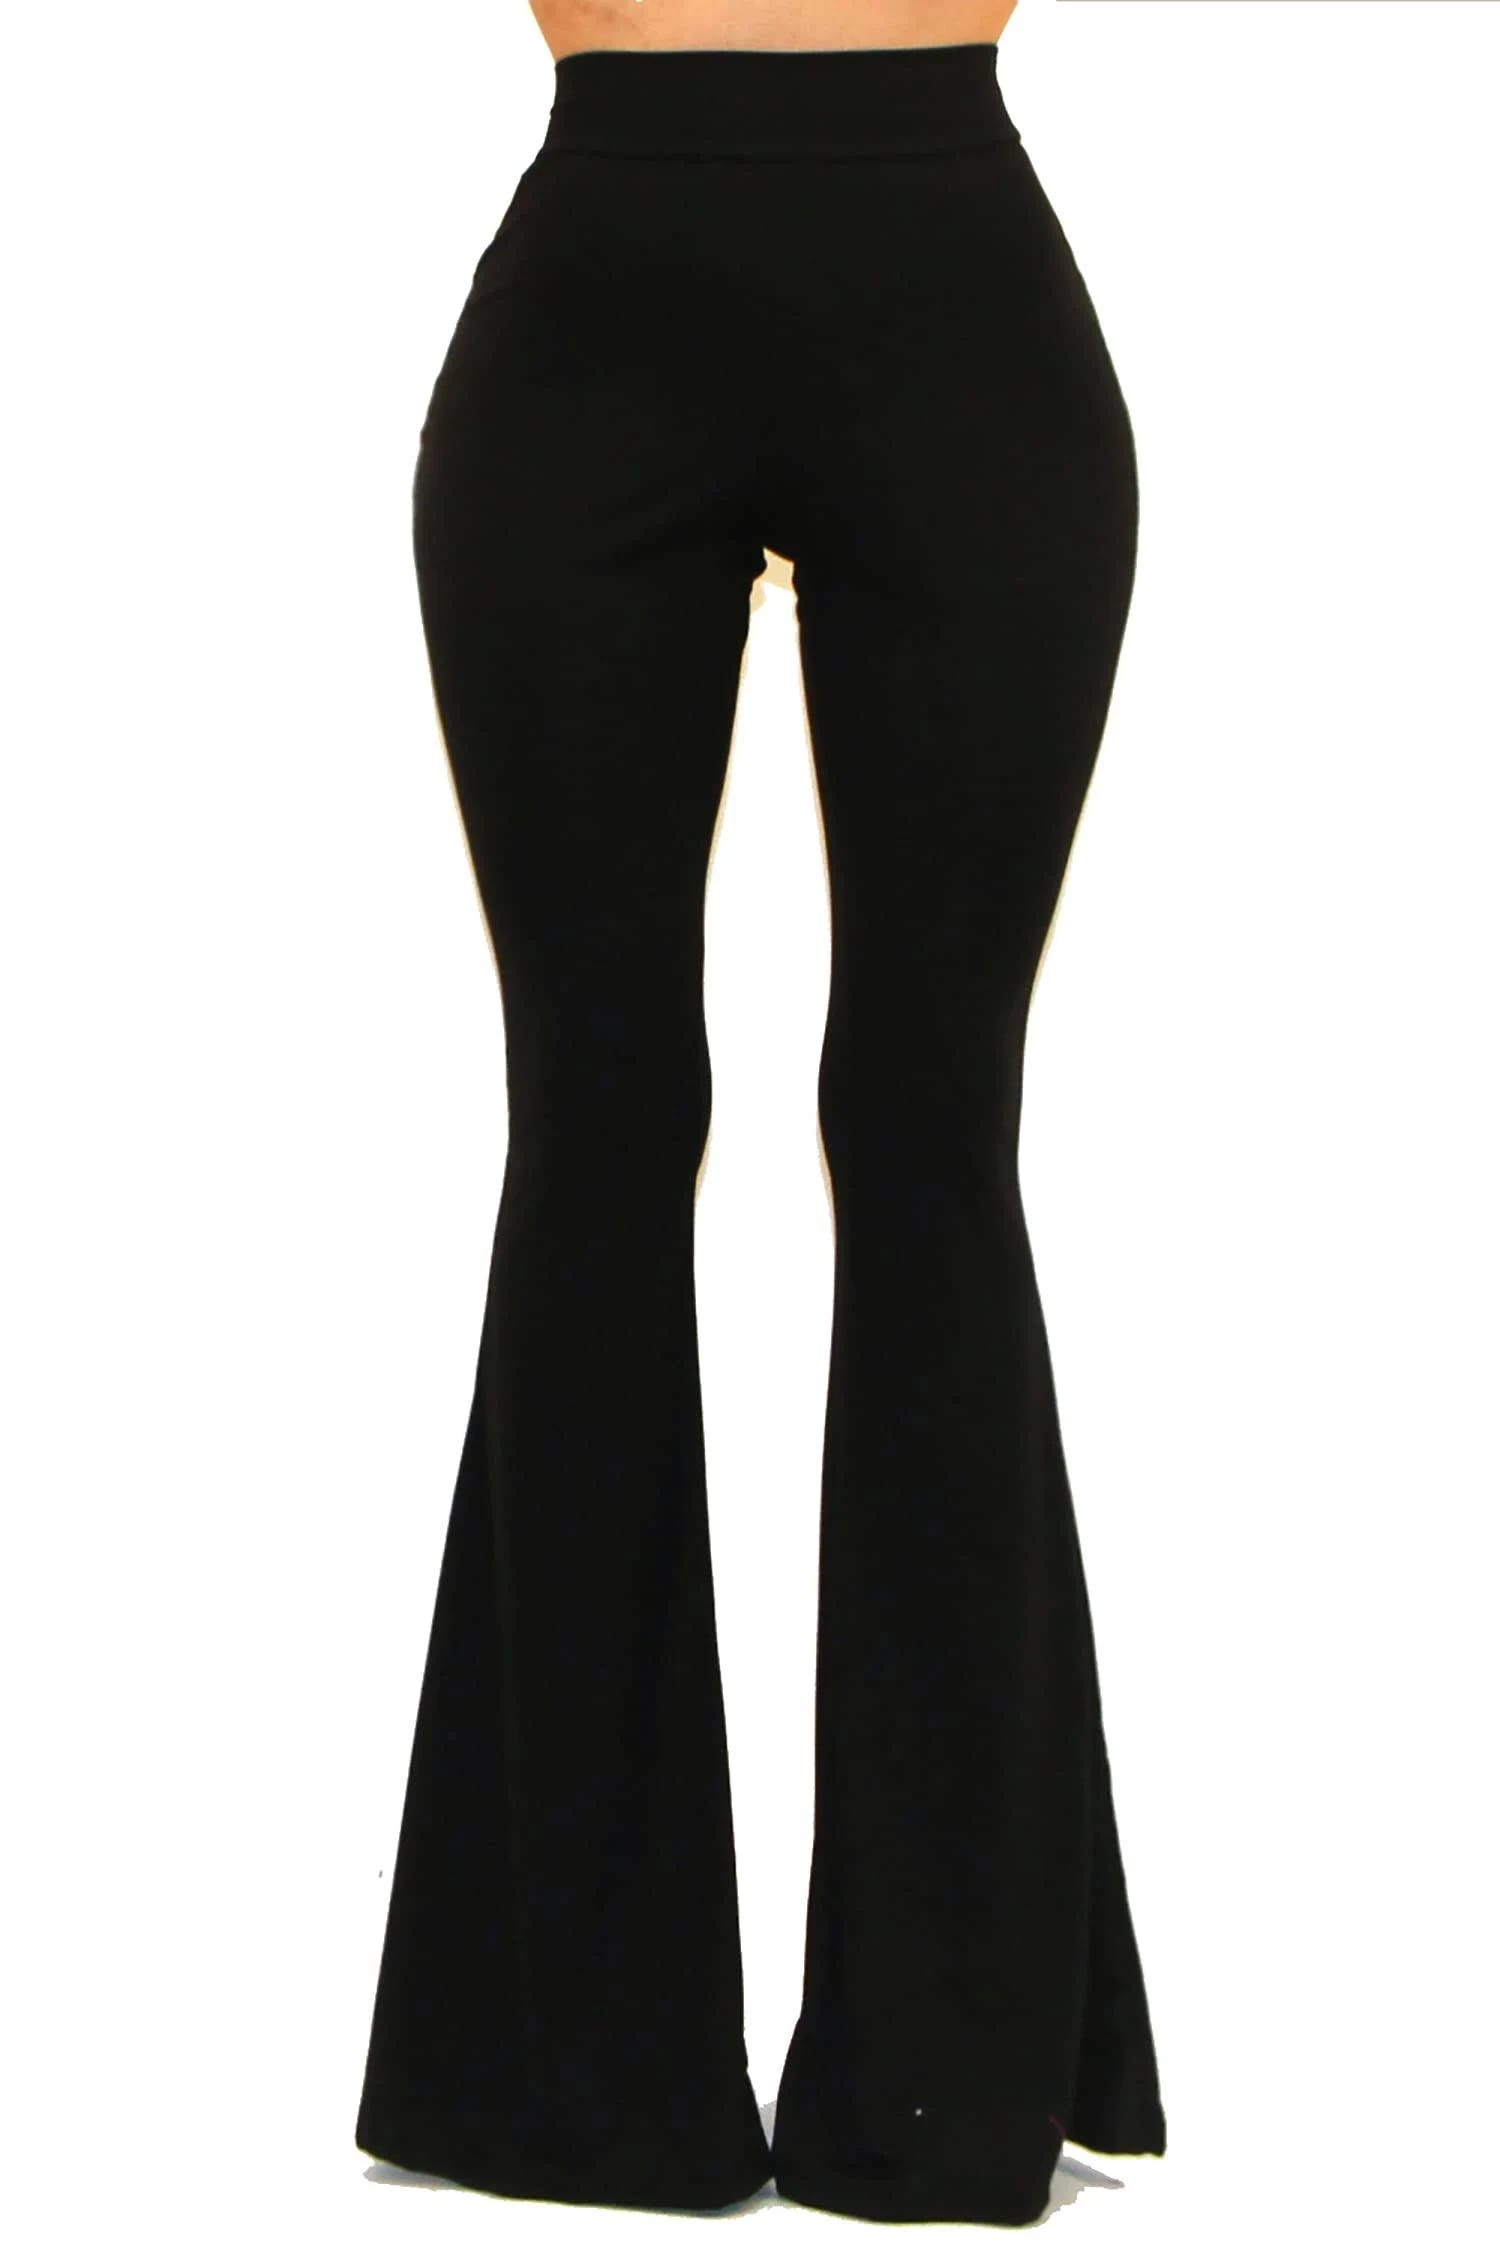 Stylish Wide-Leg Woven Pants for a Groovy Retro Look | Image